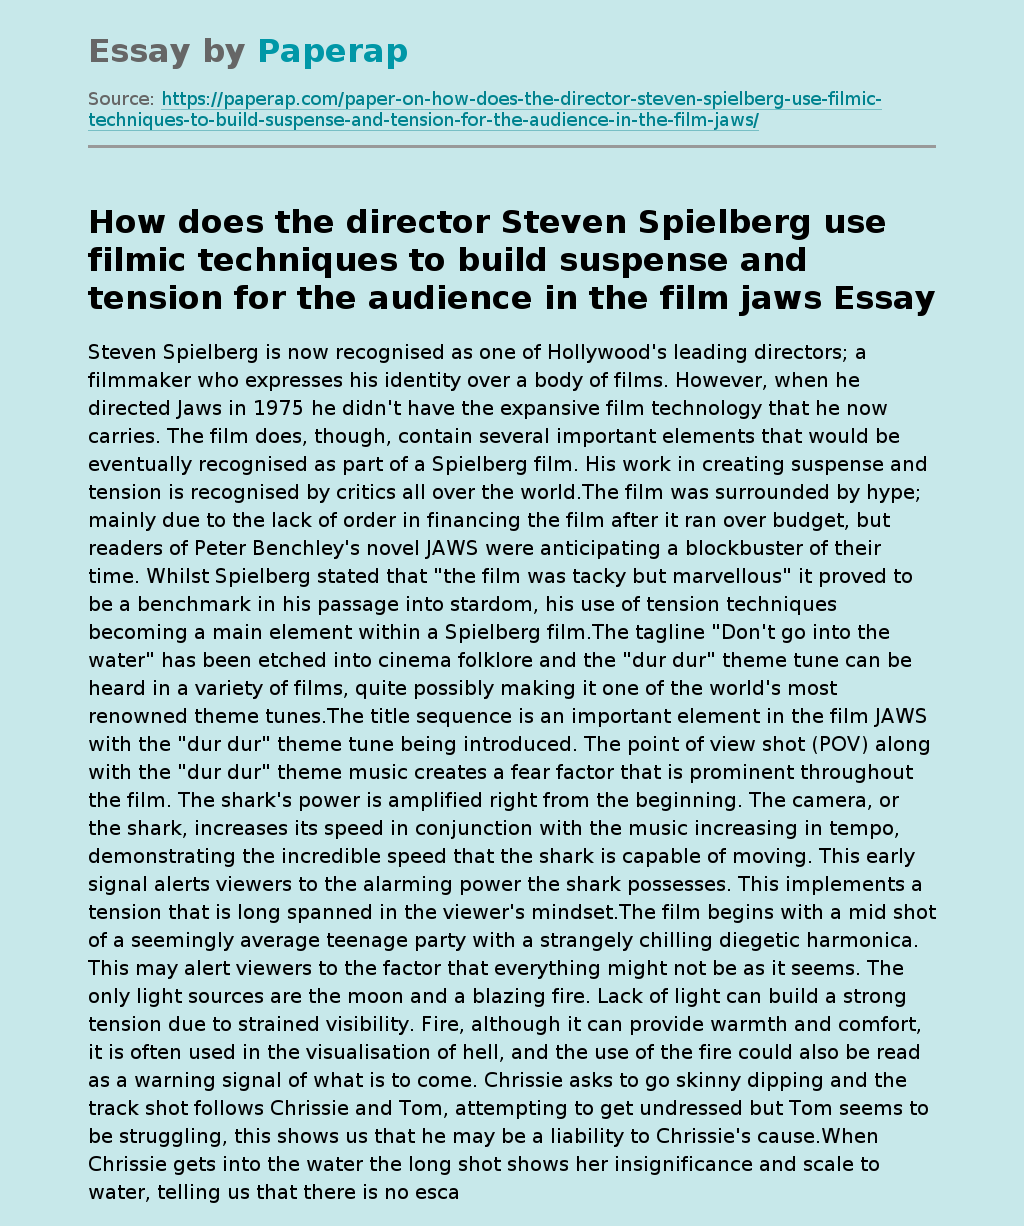 How does the director Steven Spielberg use filmic techniques to build suspense and tension for the audience in the film jaws